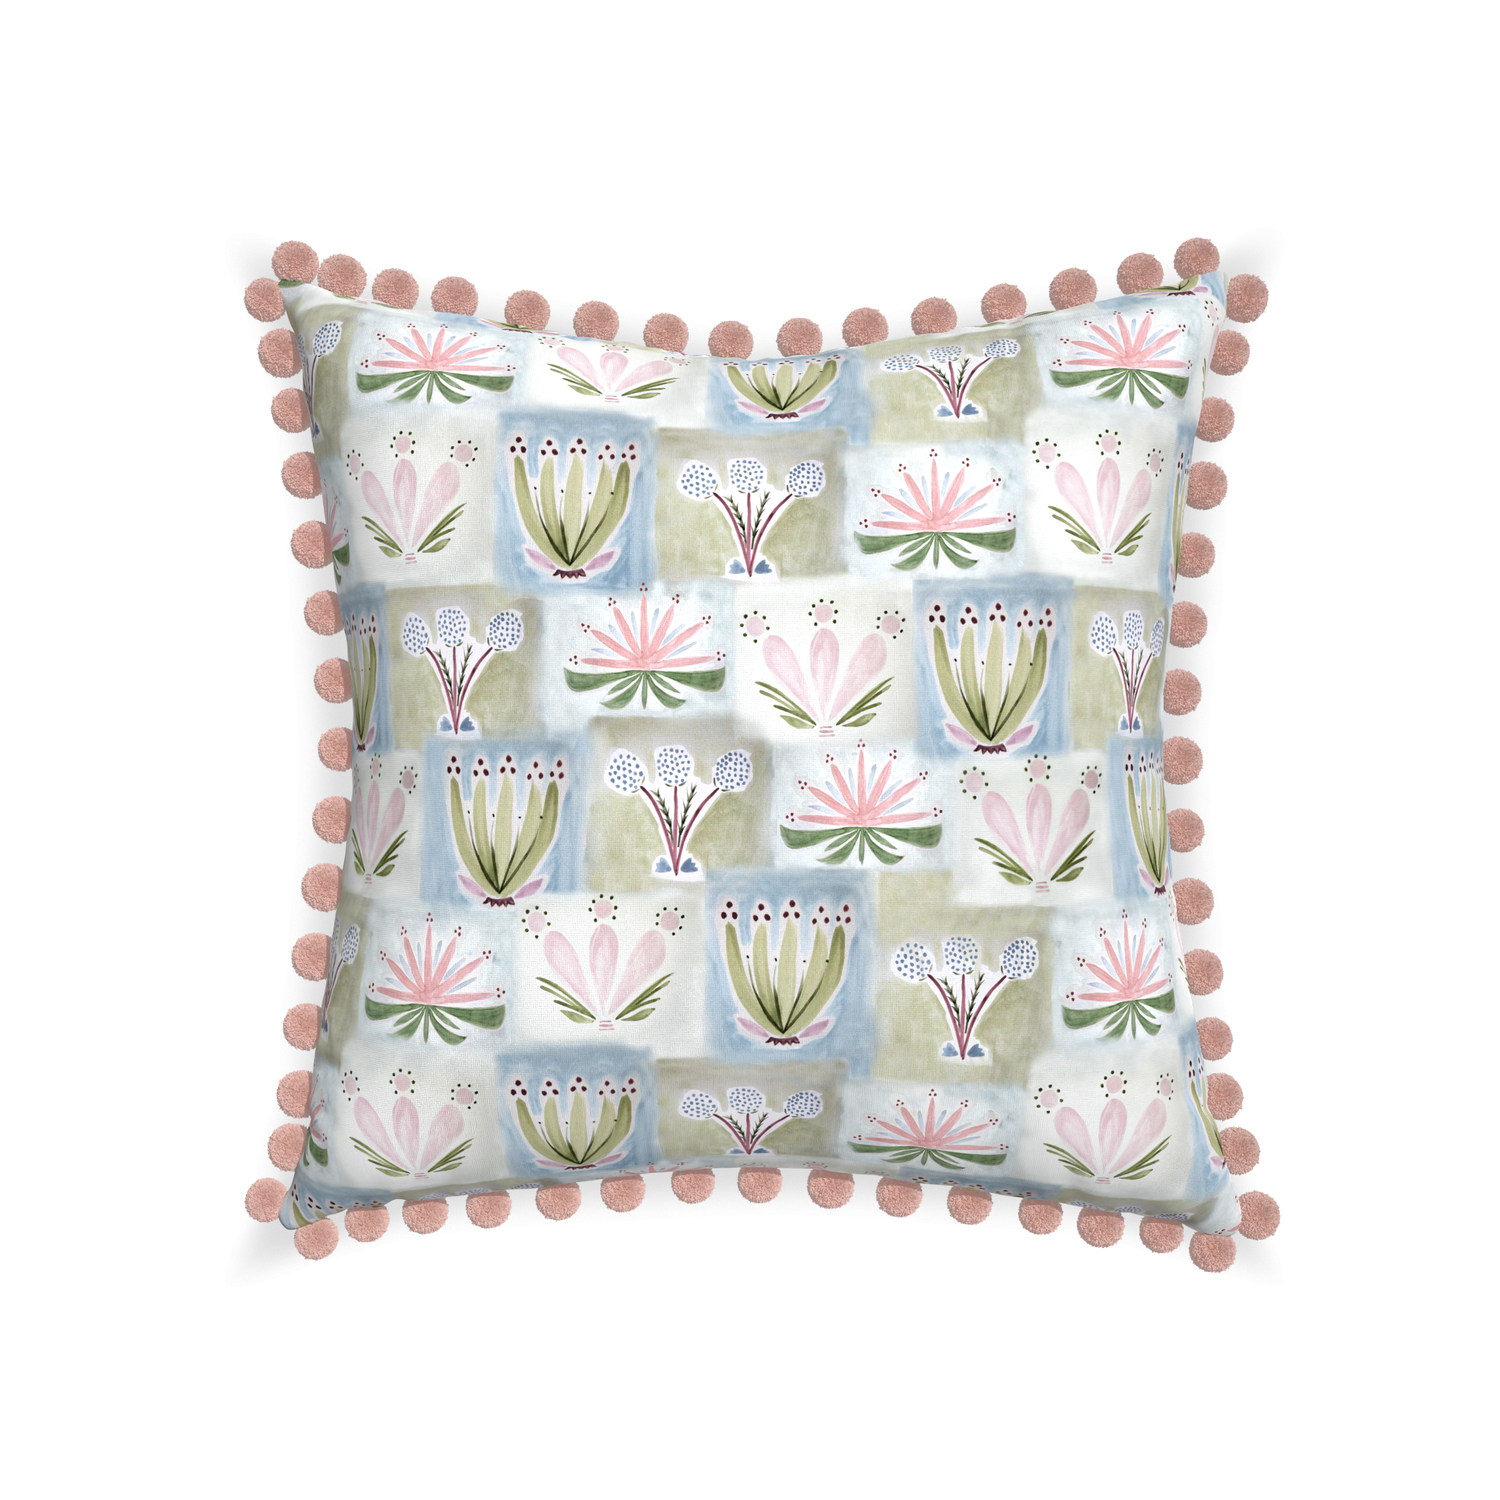 22-square harper custom hand-painted floralpillow with rose pom pom on white background